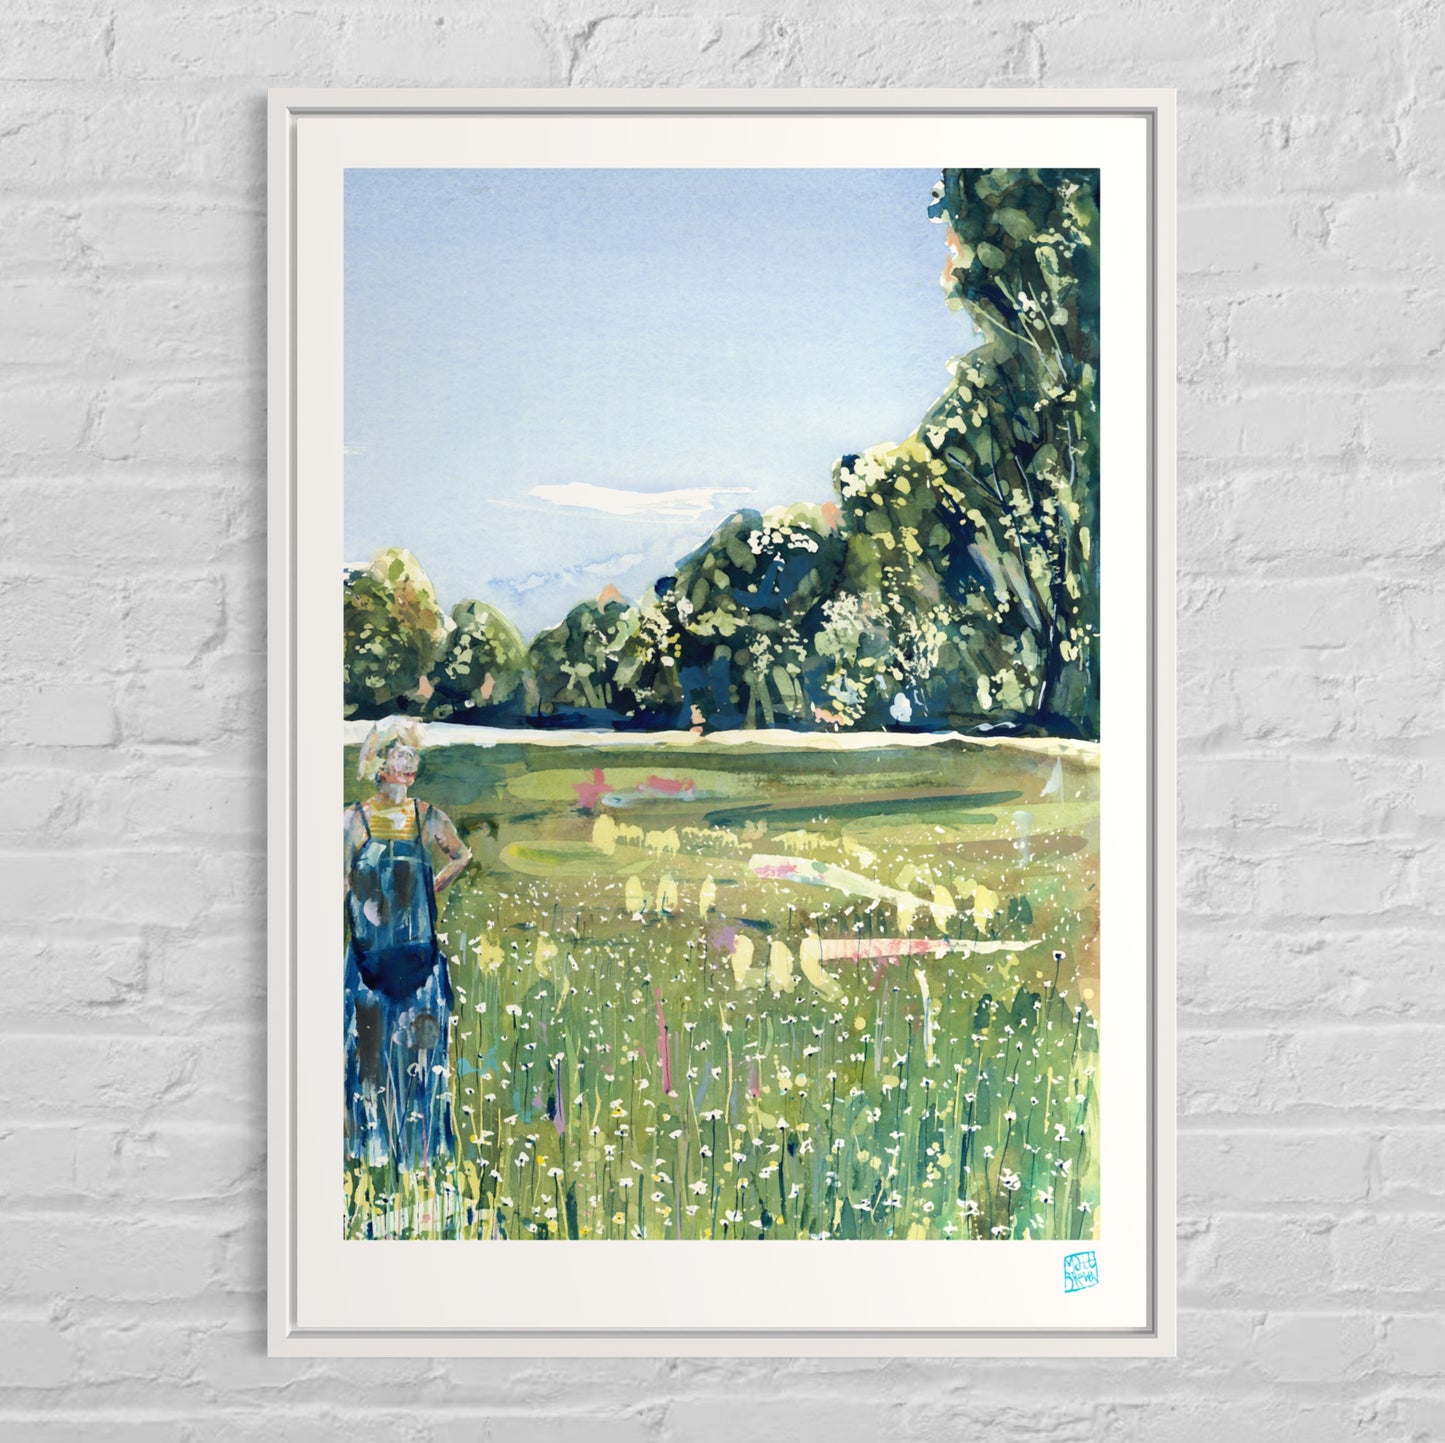 New A1 | A2 Limited Edition Print - With Daisies